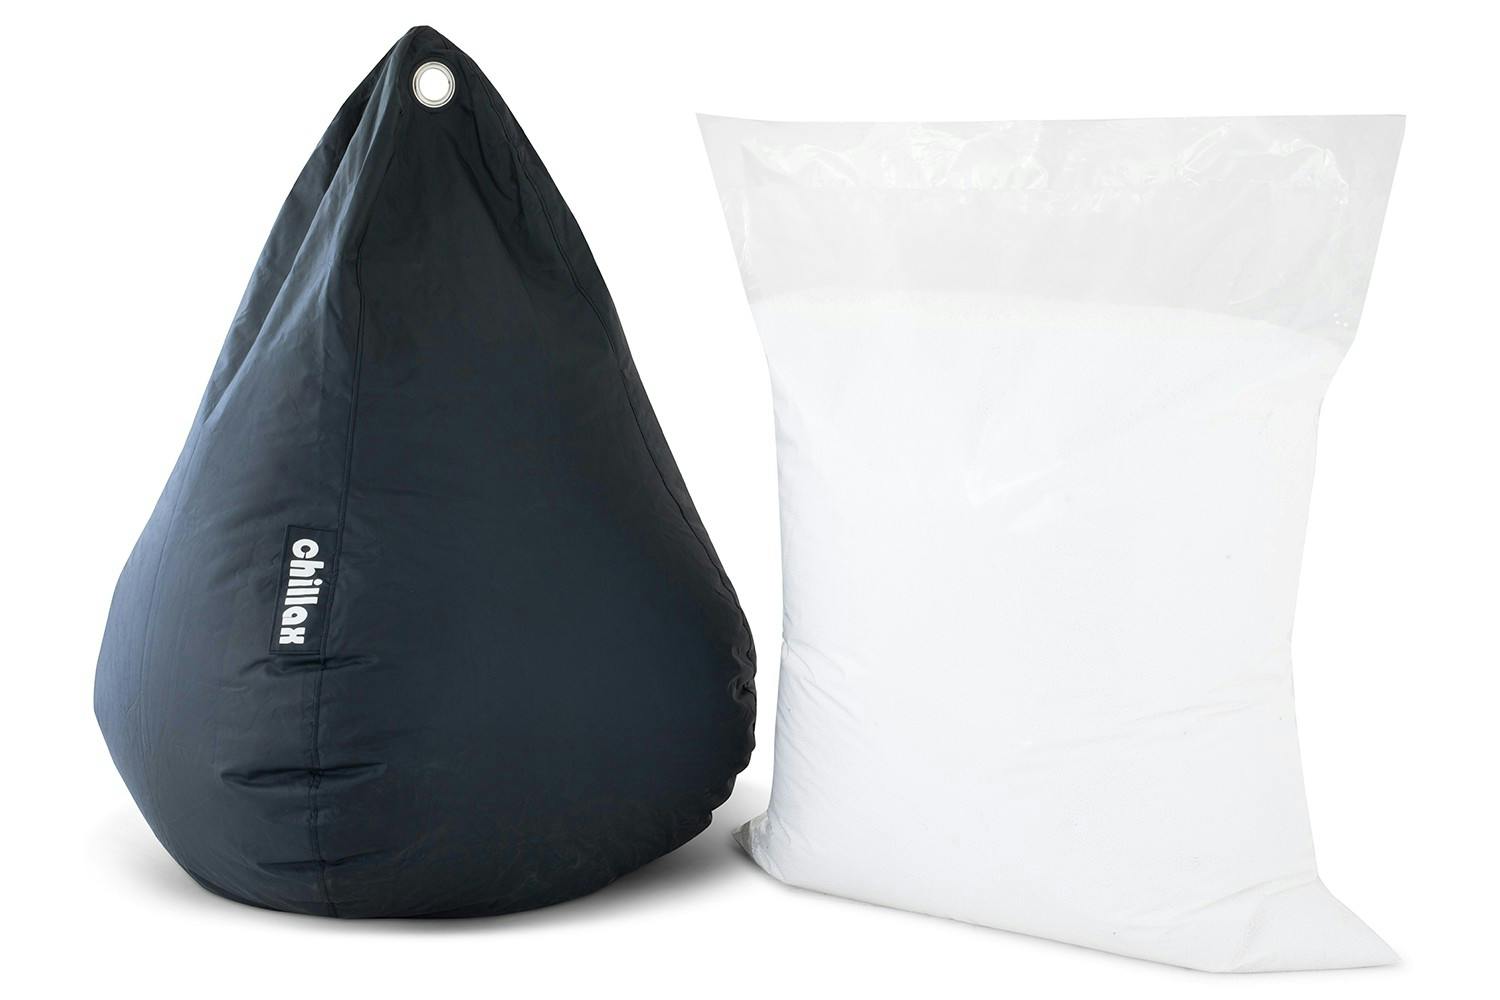 How to Fill Bean Bags?